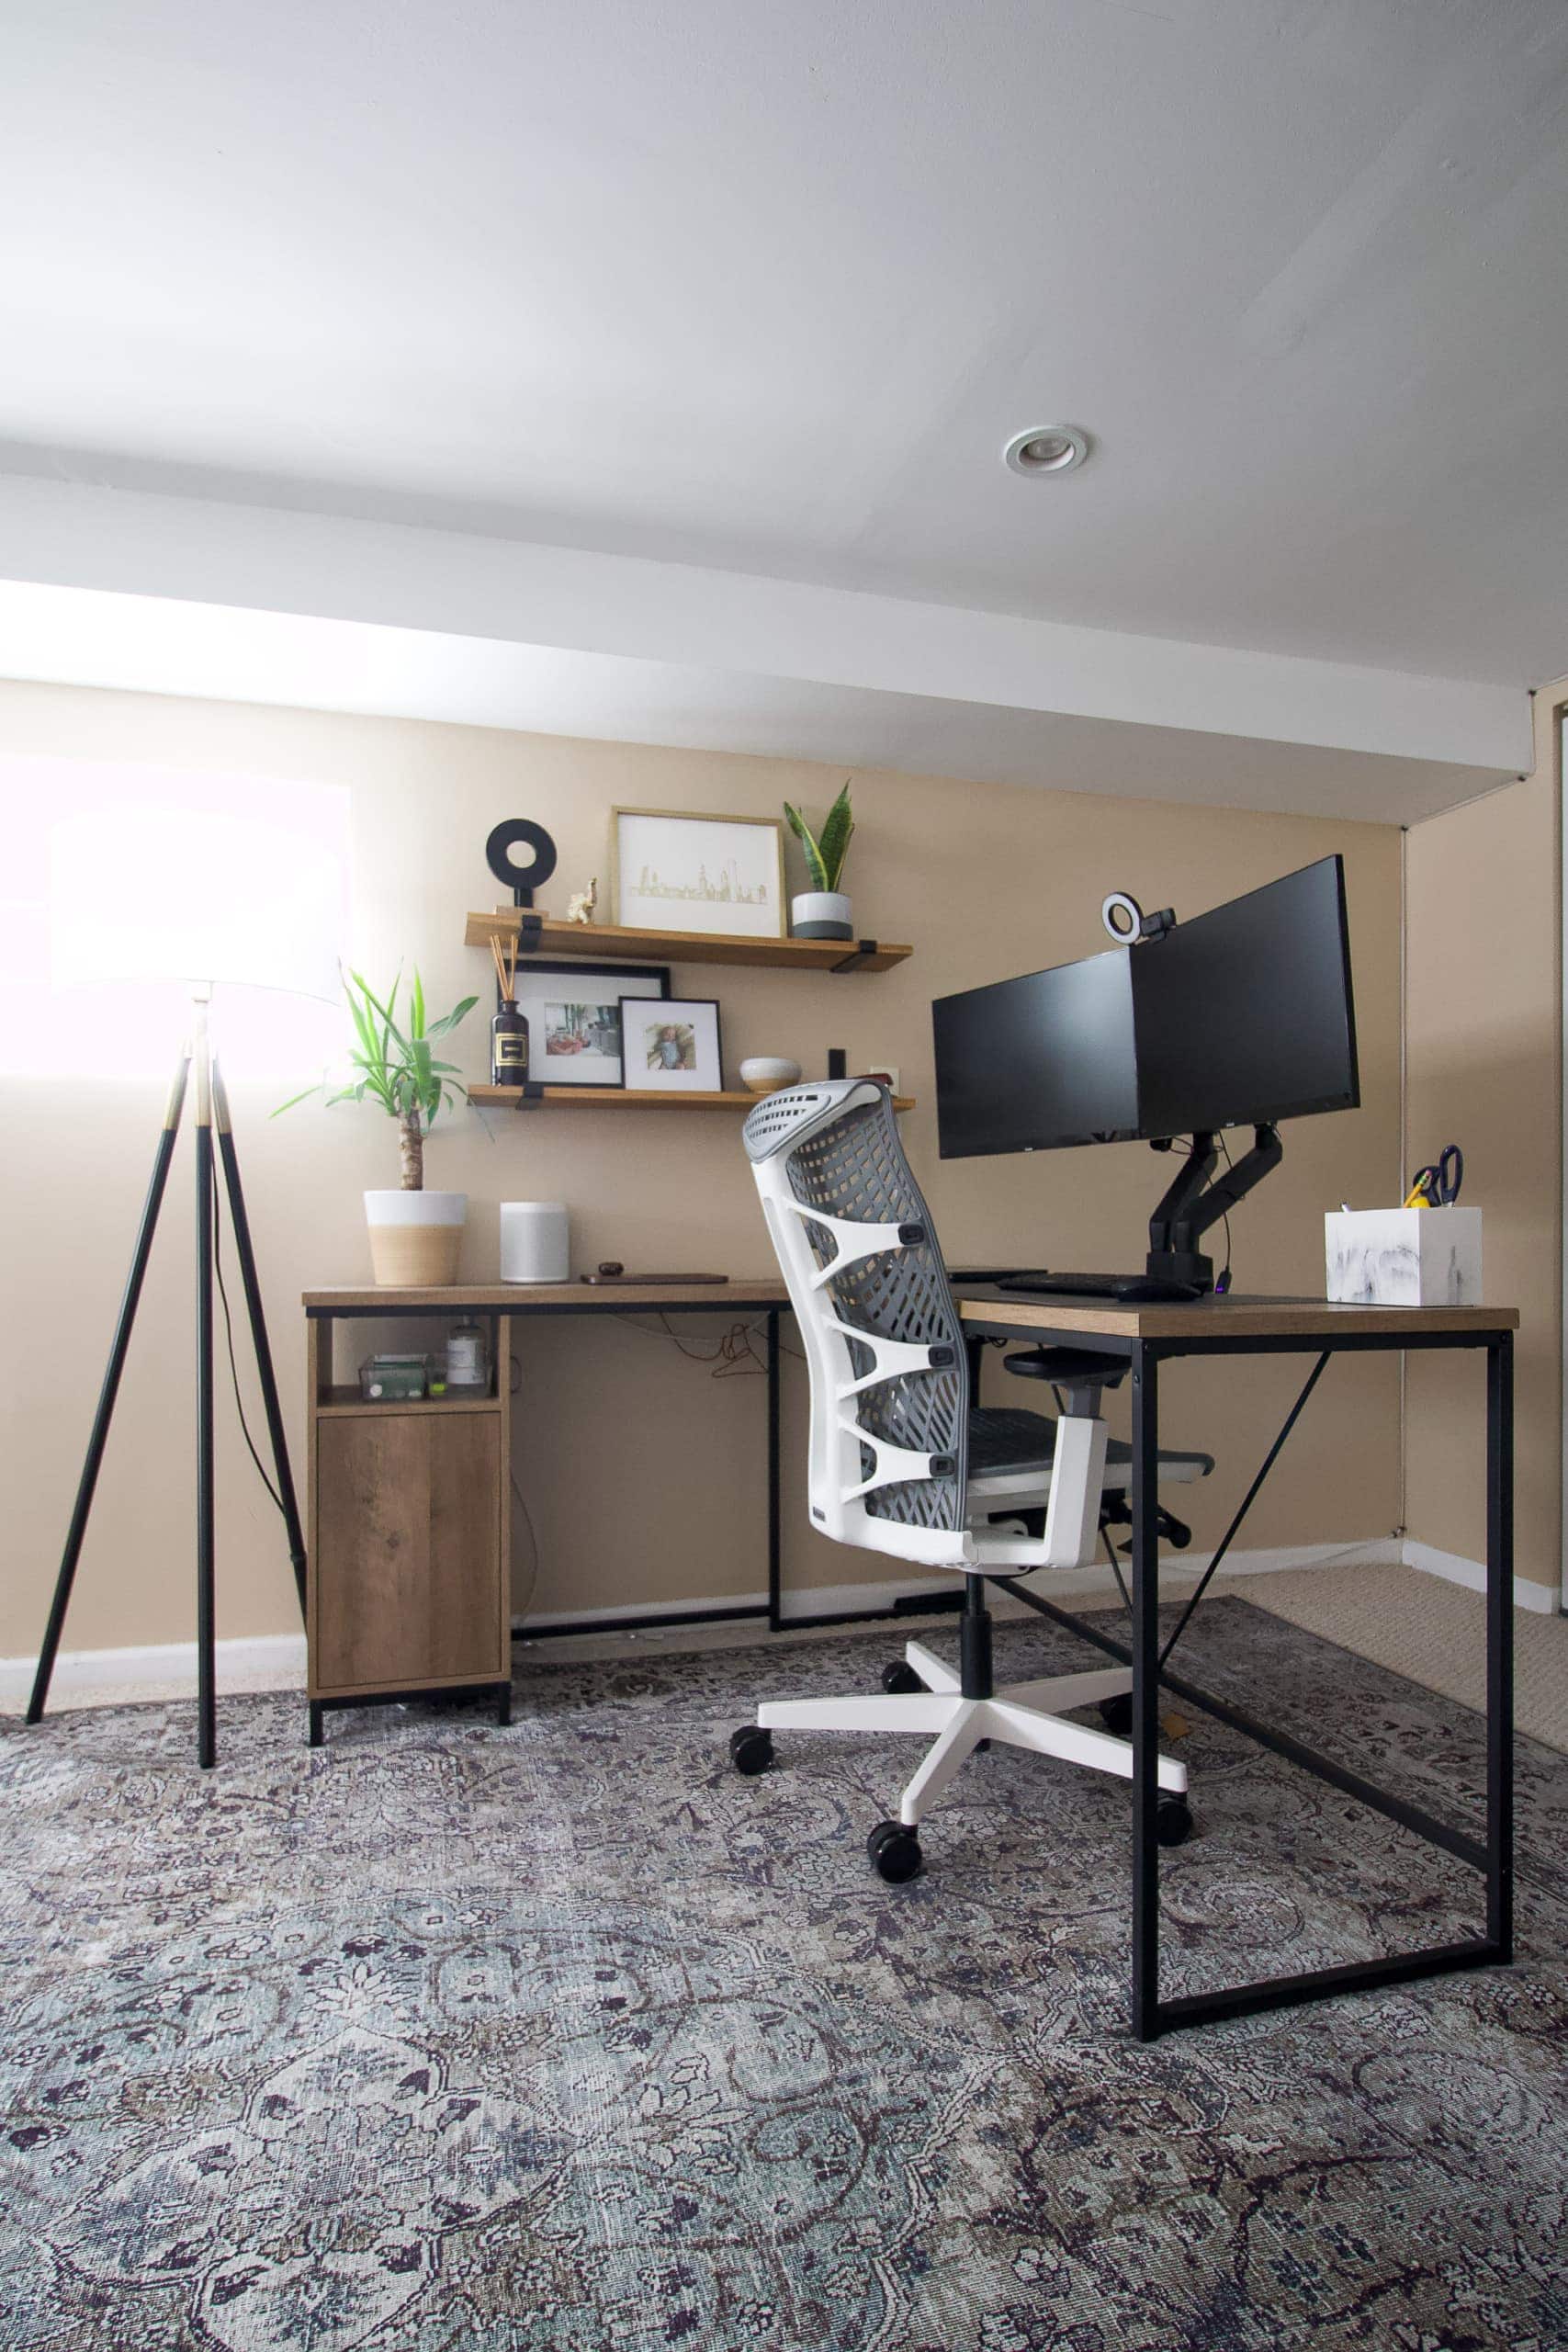 Creating a work from home office in the basement